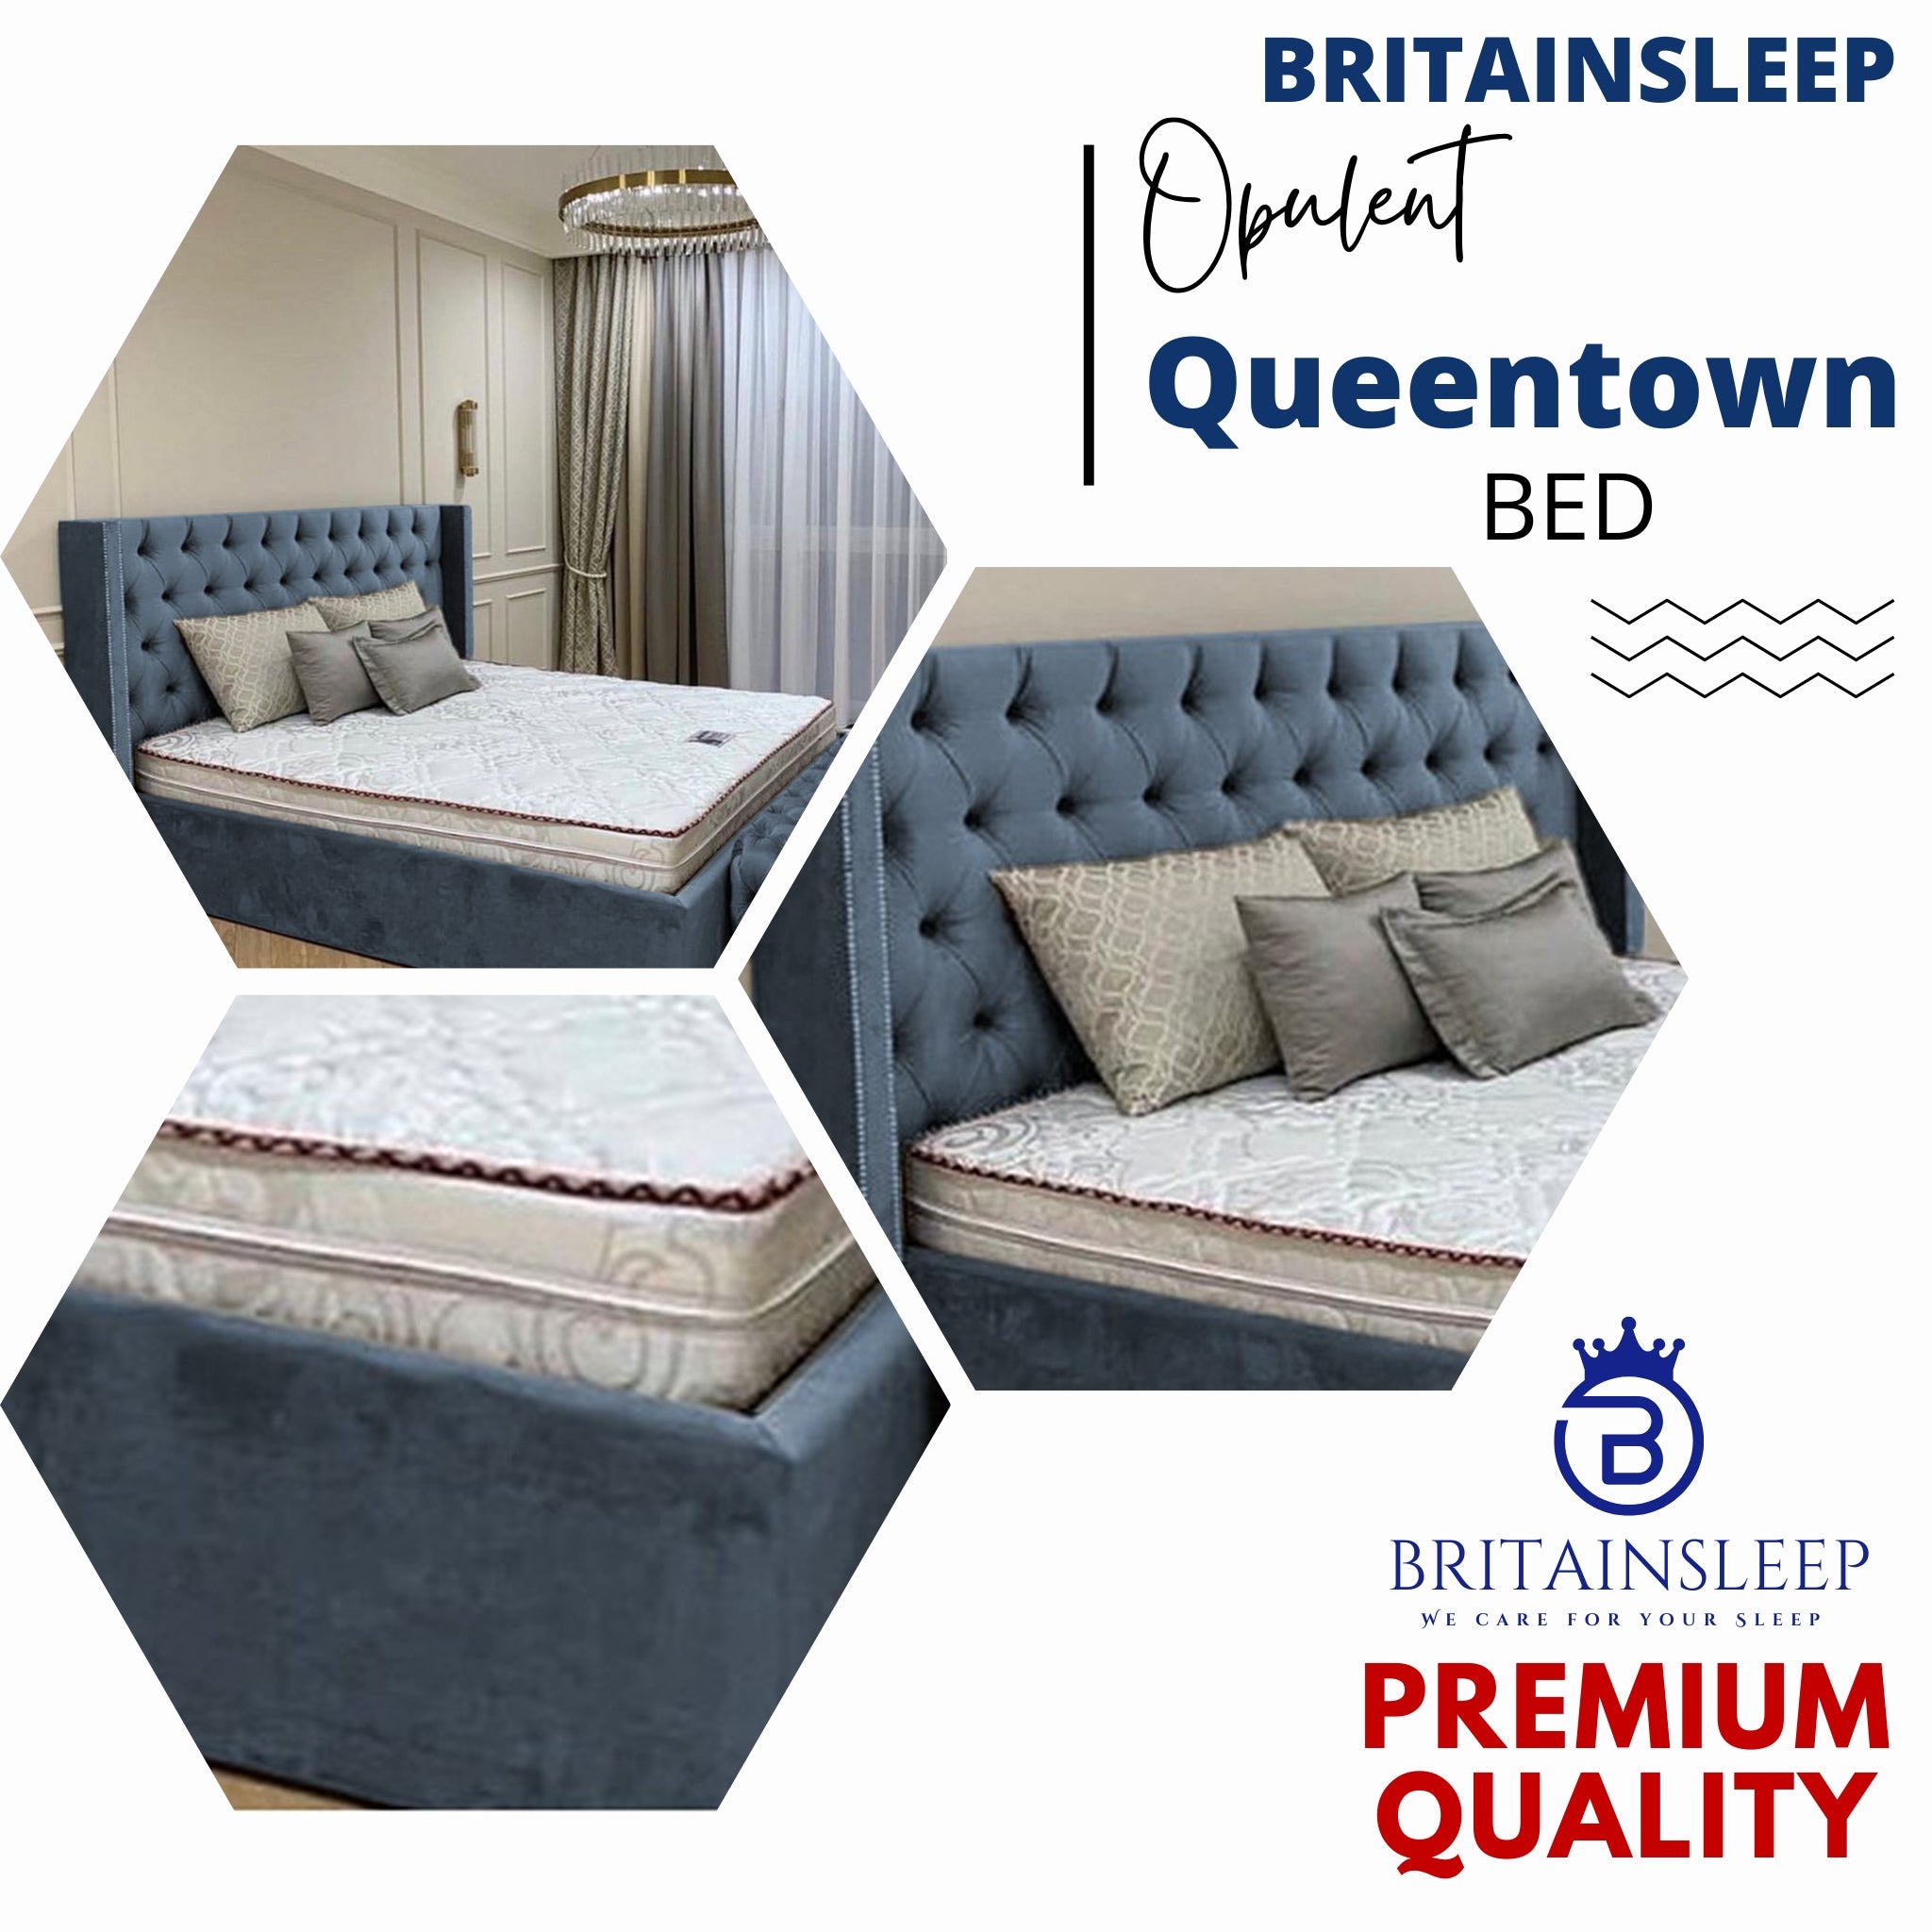 Queen Town Double Studded 50'' Wing Ottoman Storage Bed Frame | Double | Single | Small Double | KingSize | Super King Size Bed Britainsleep